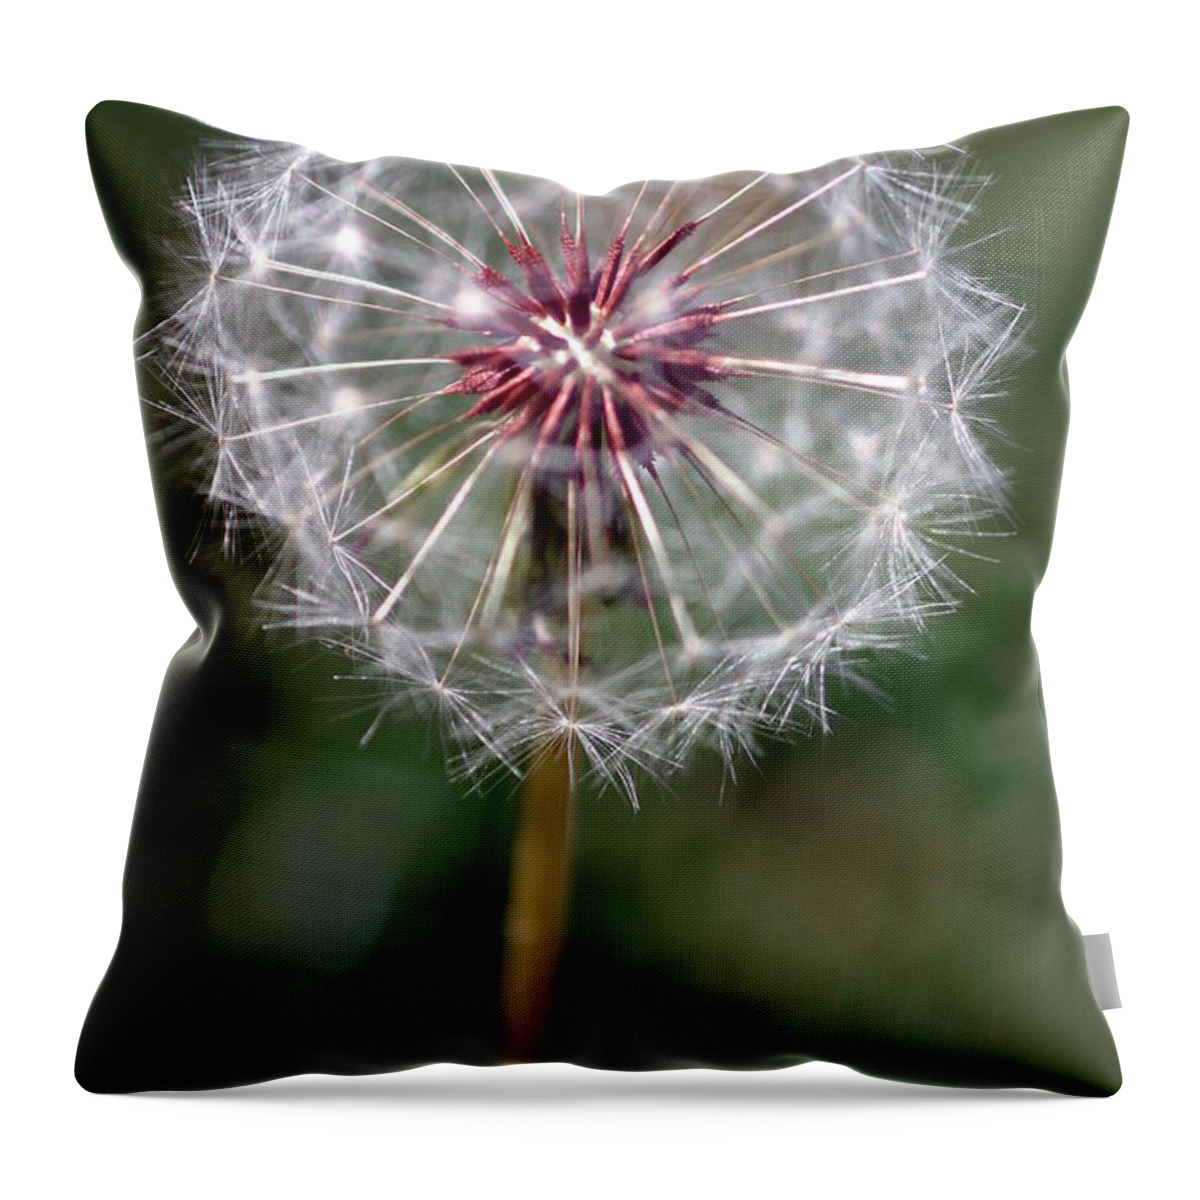 Abstract Throw Pillow featuring the photograph Dandelion Seed Head #2 by Henrik Lehnerer